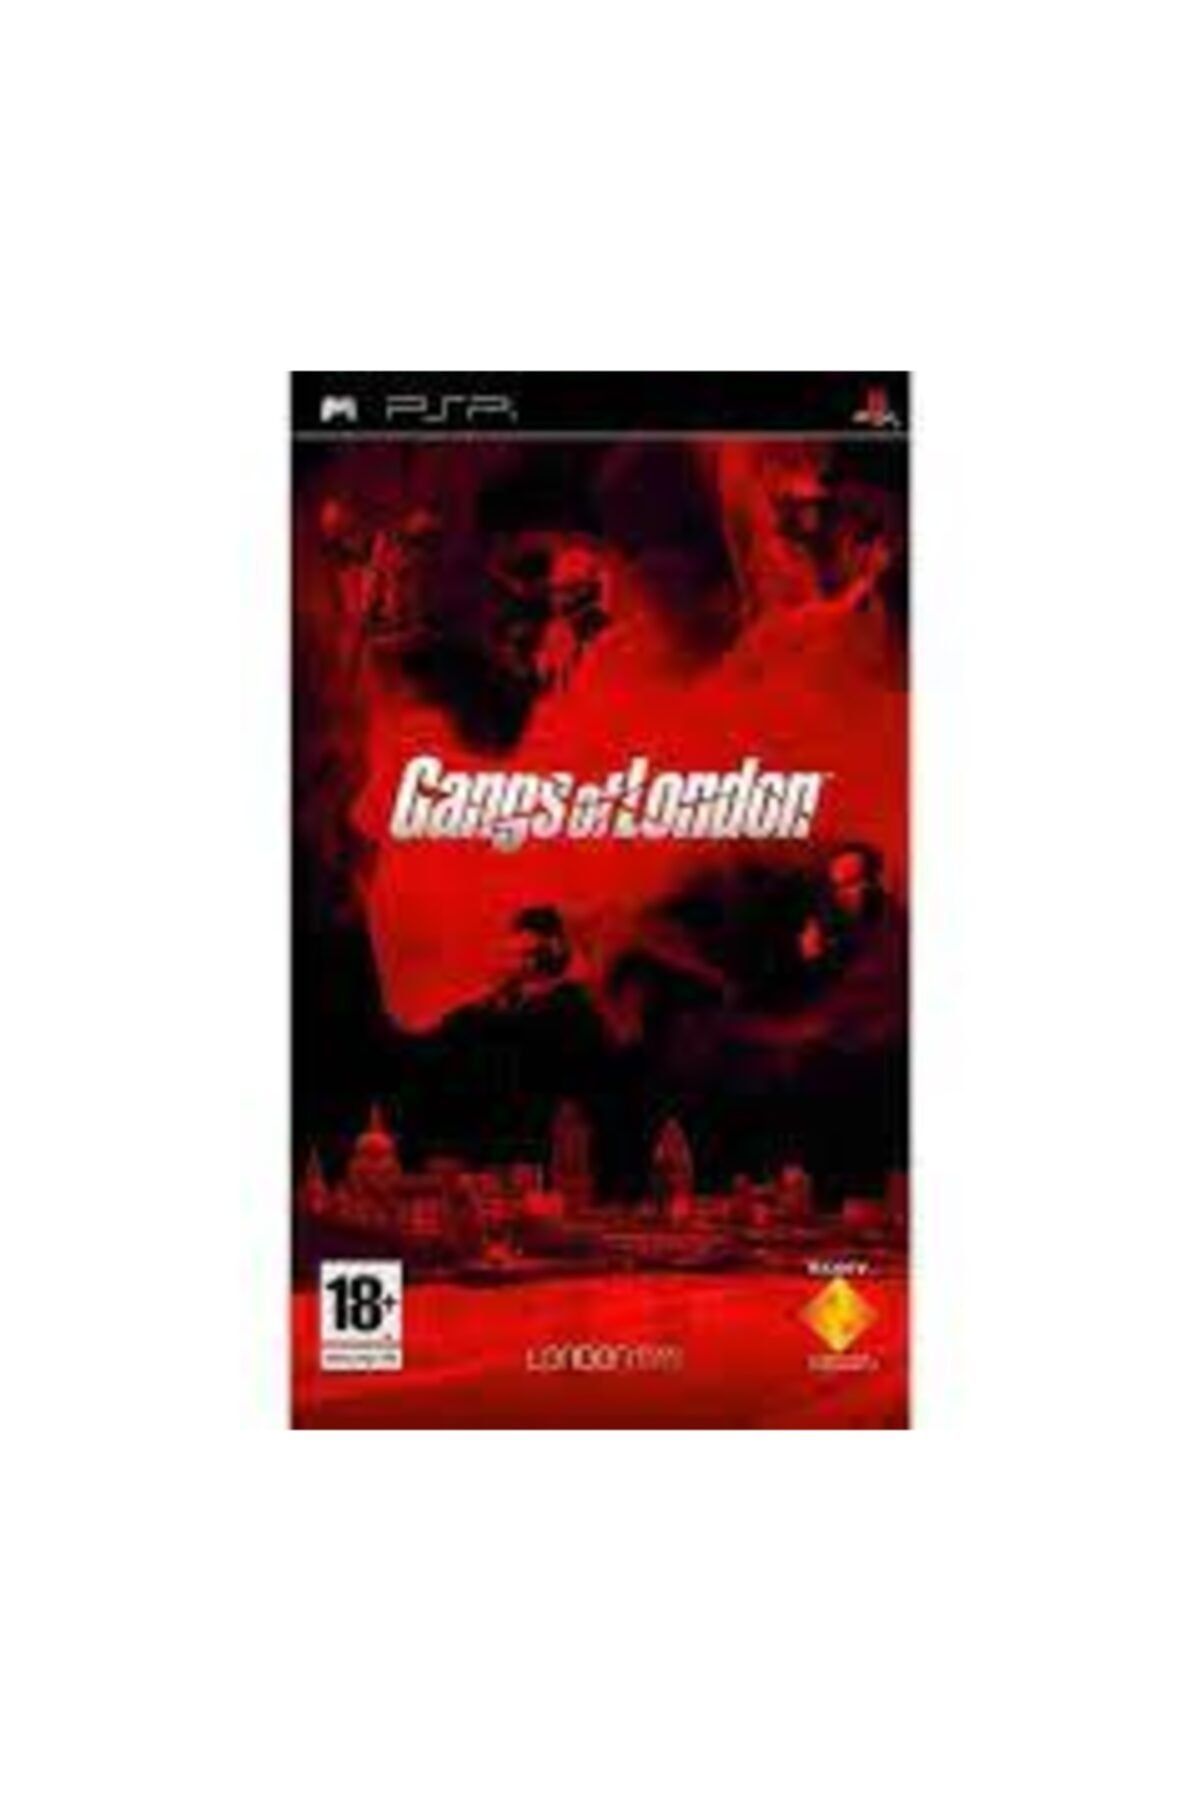 Sony Psp Gangs Of London From The Makers Of The Geteway Gameplay